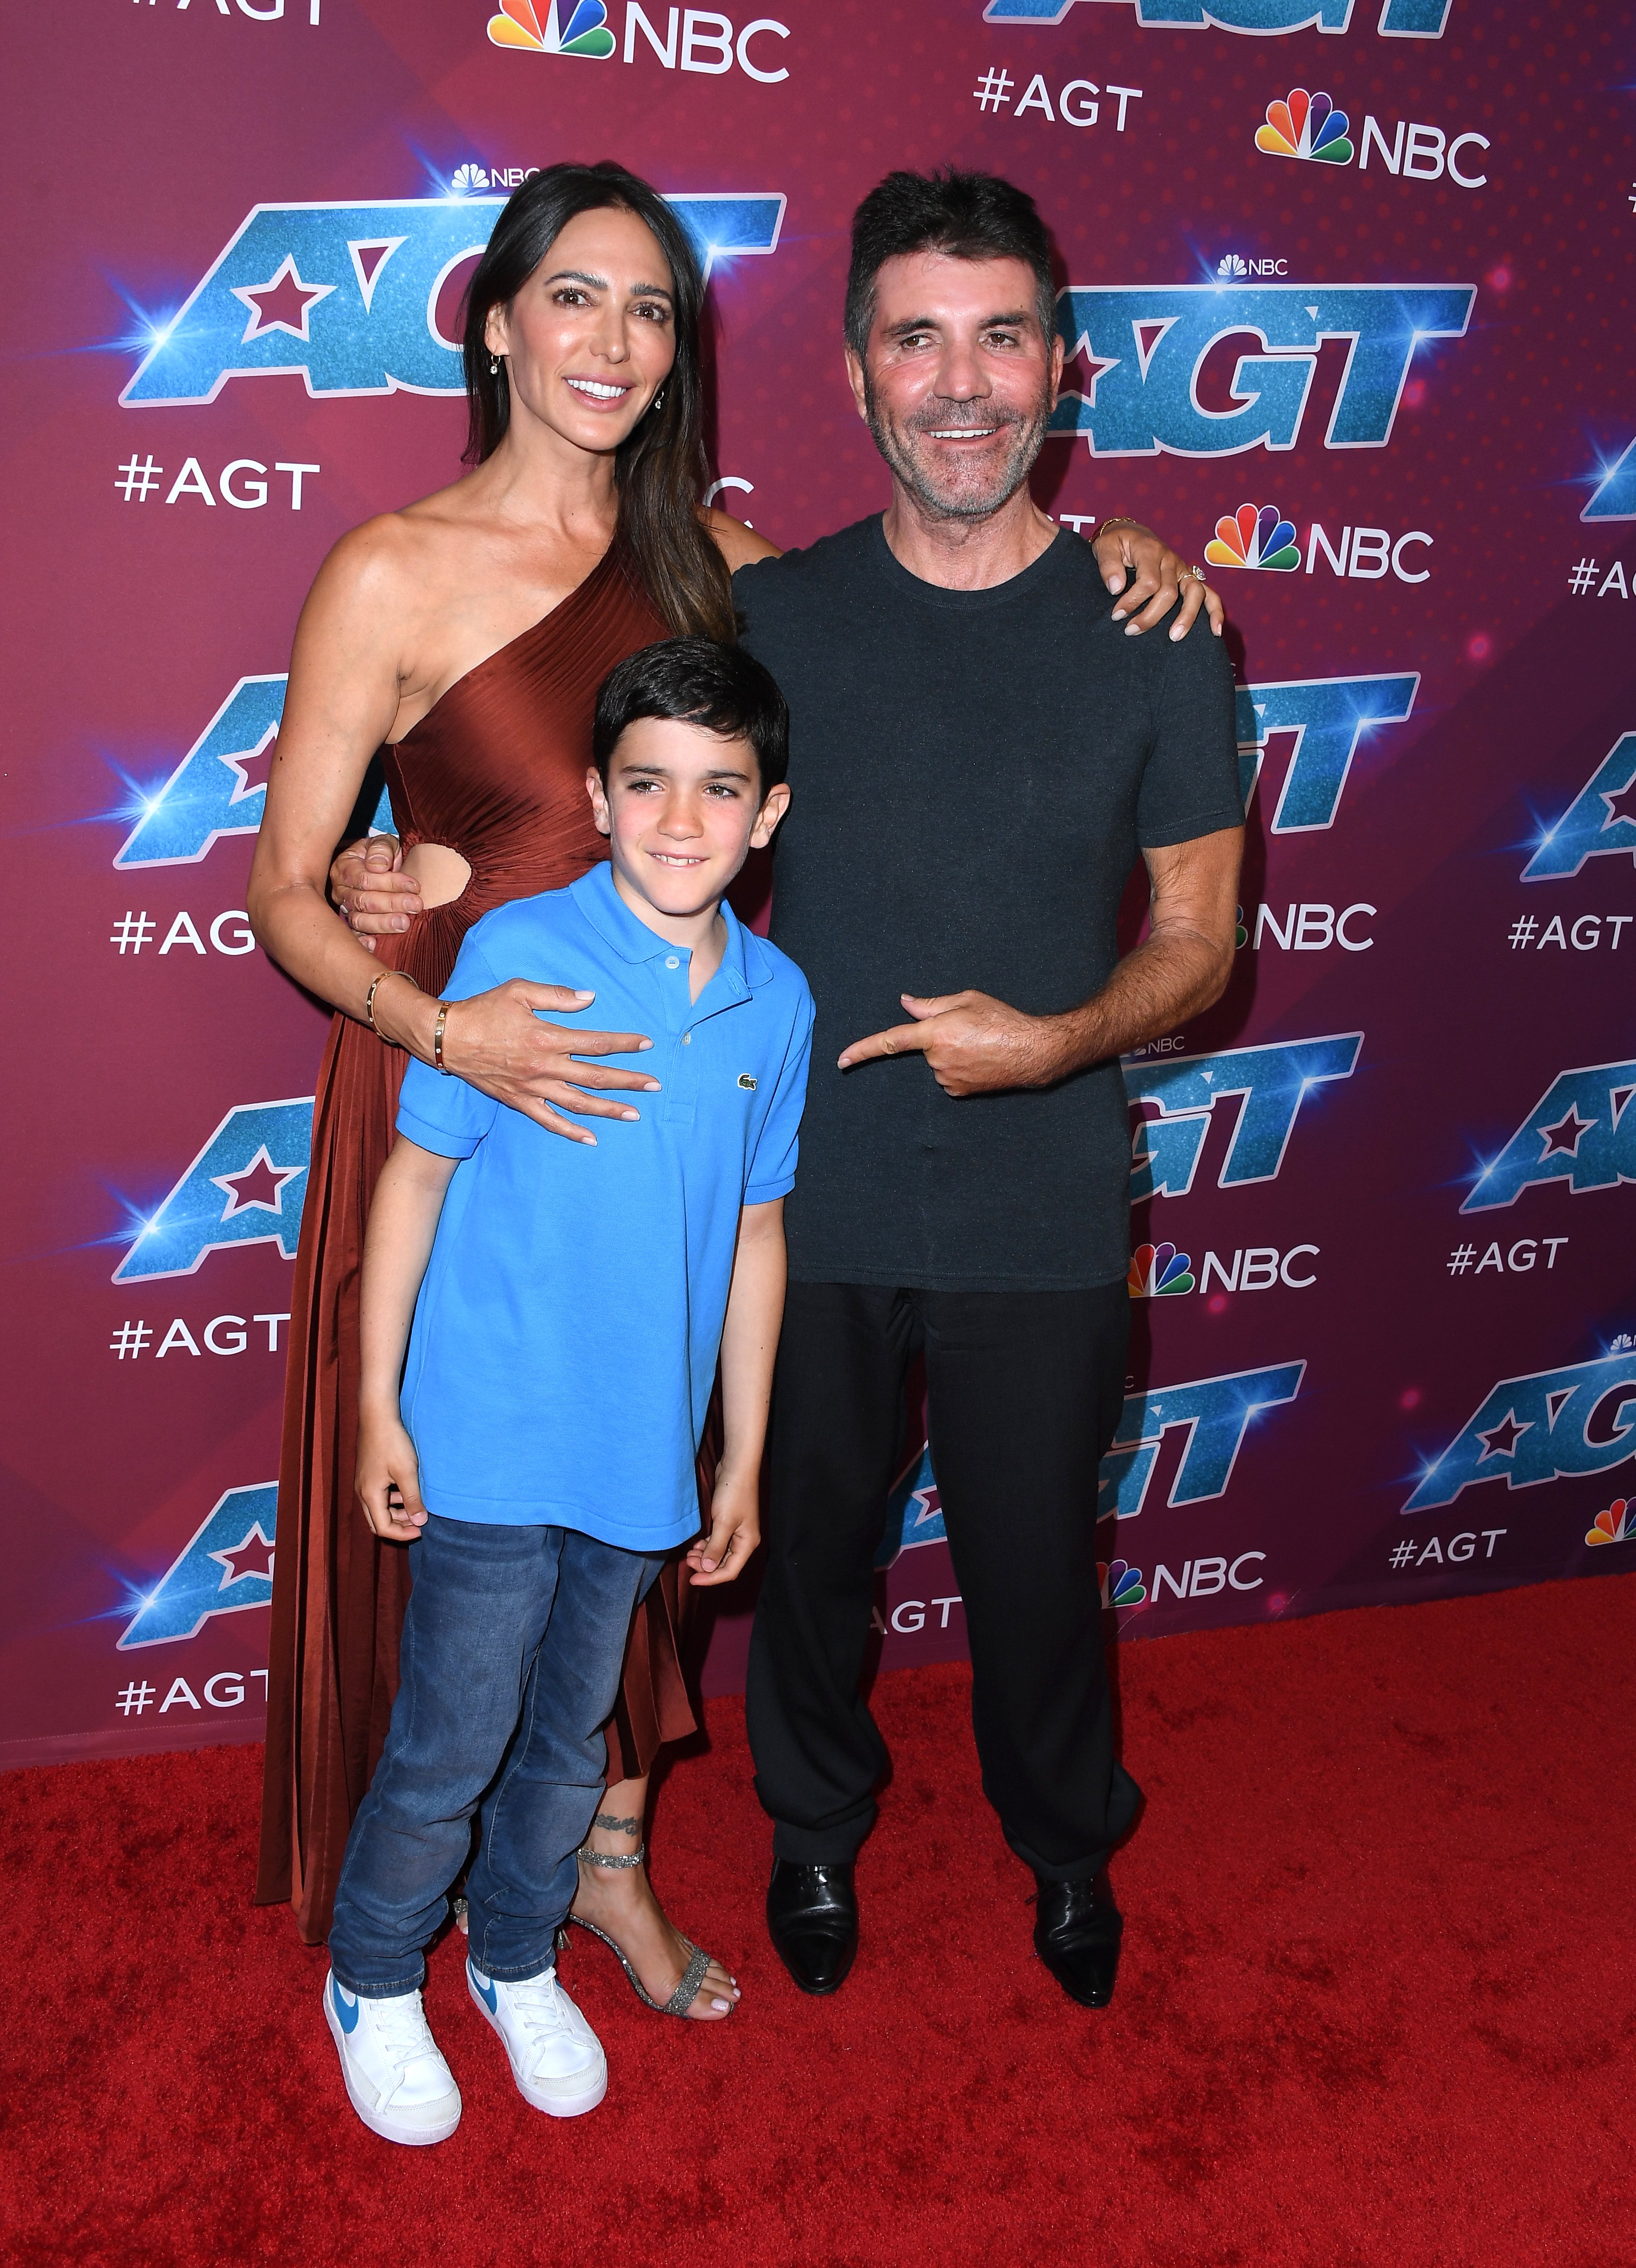  Lauren Silverman, Eric Cowell and Simon Cowell arrives at the Red Carpet For "America's Got Talent" Season 17 Live Show at Sheraton Pasadena Hotel on September 13, 2022 in Pasadena, California | Source: Getty Images 